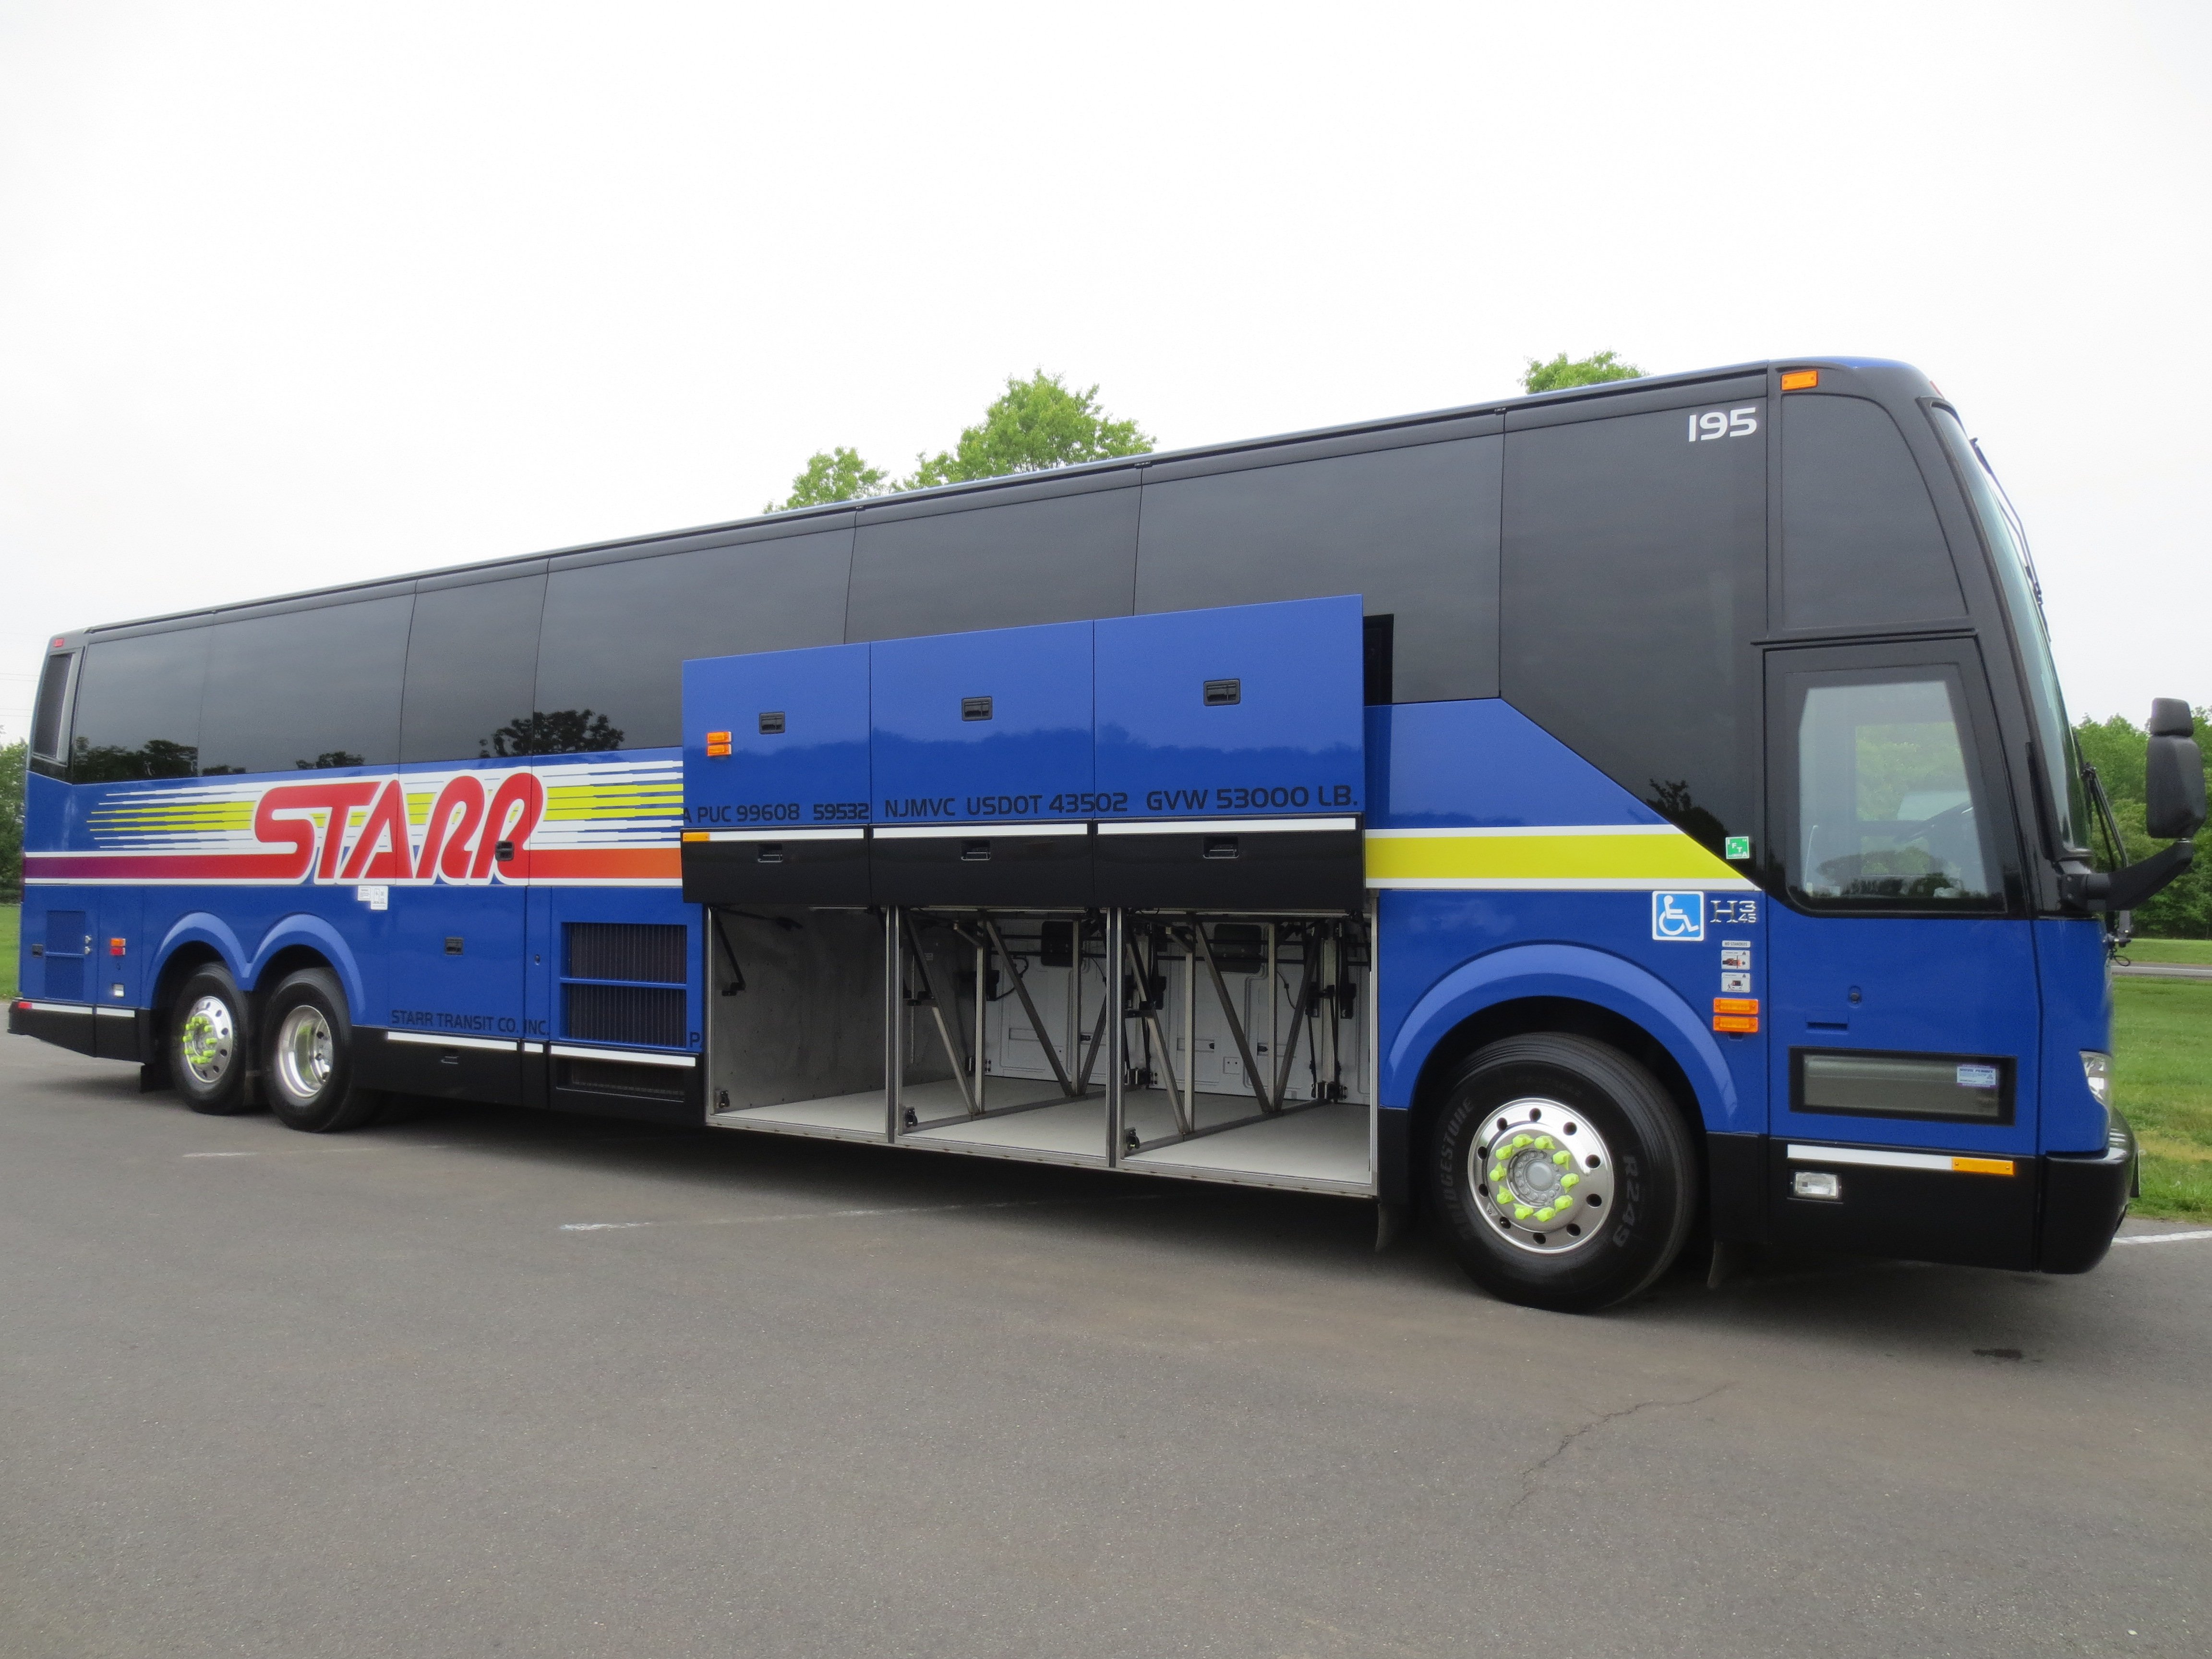 starr one day bus tours